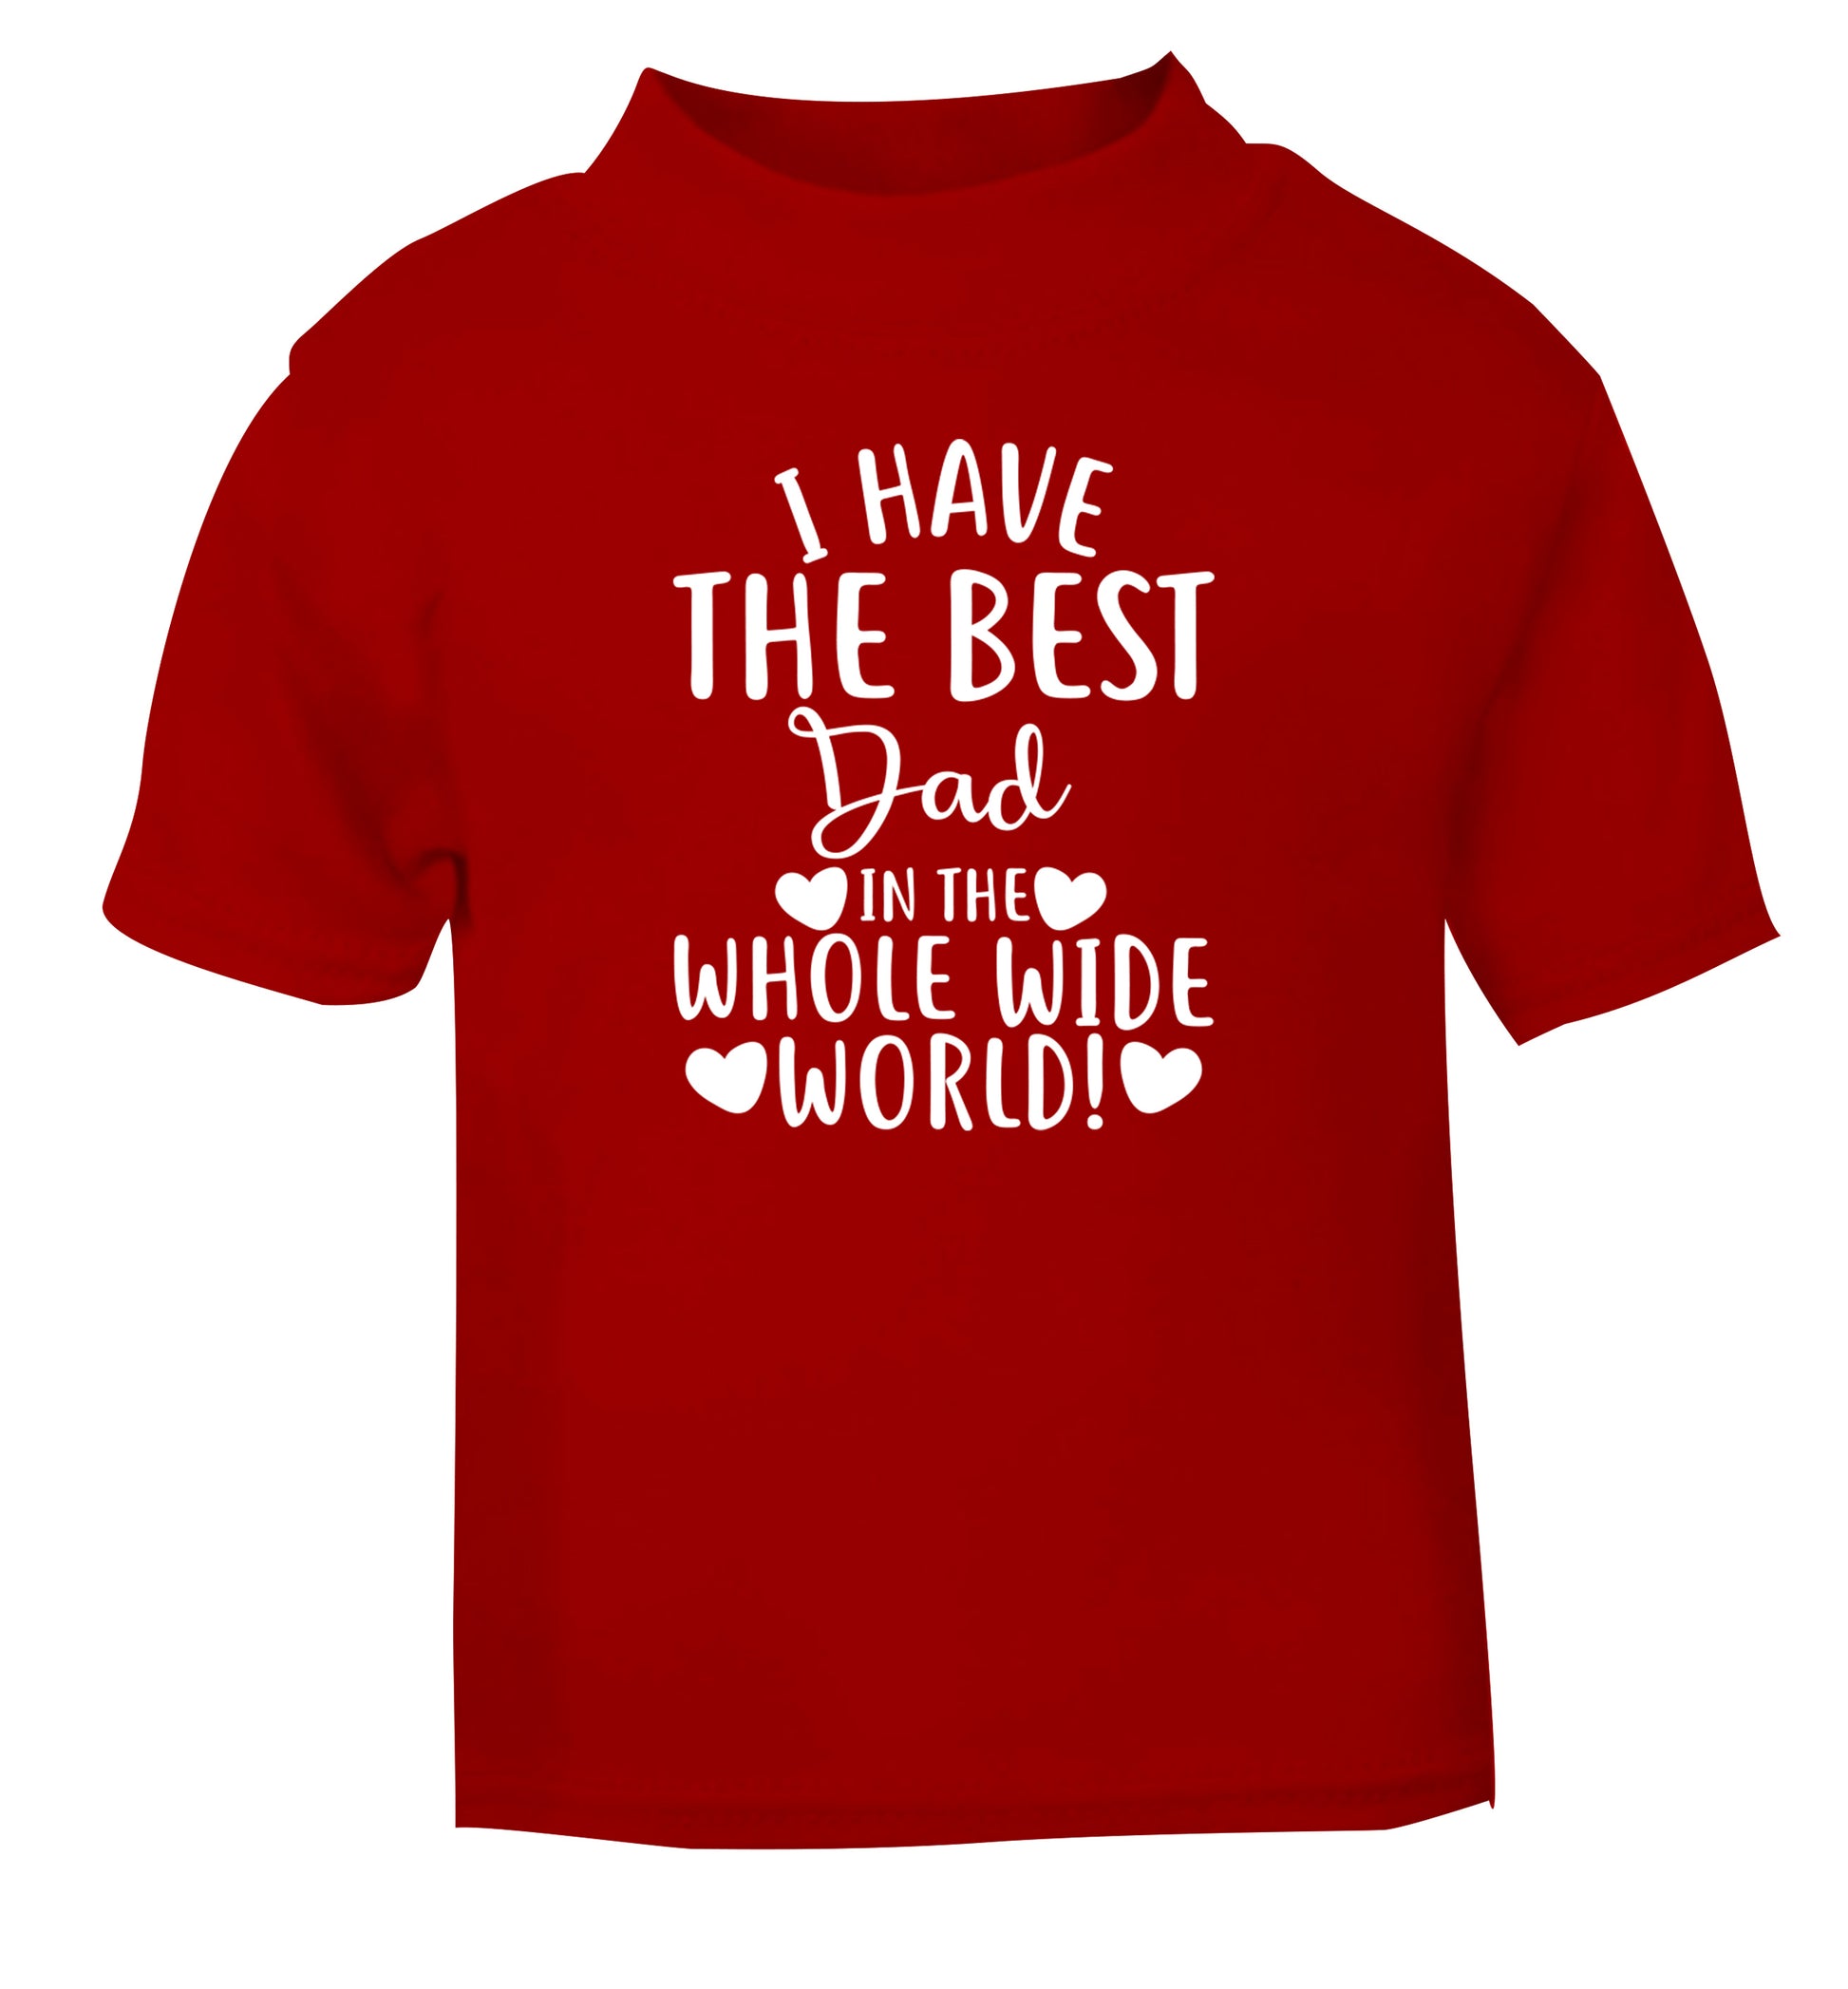 I have the best dad in the whole wide world! red Baby Toddler Tshirt 2 Years